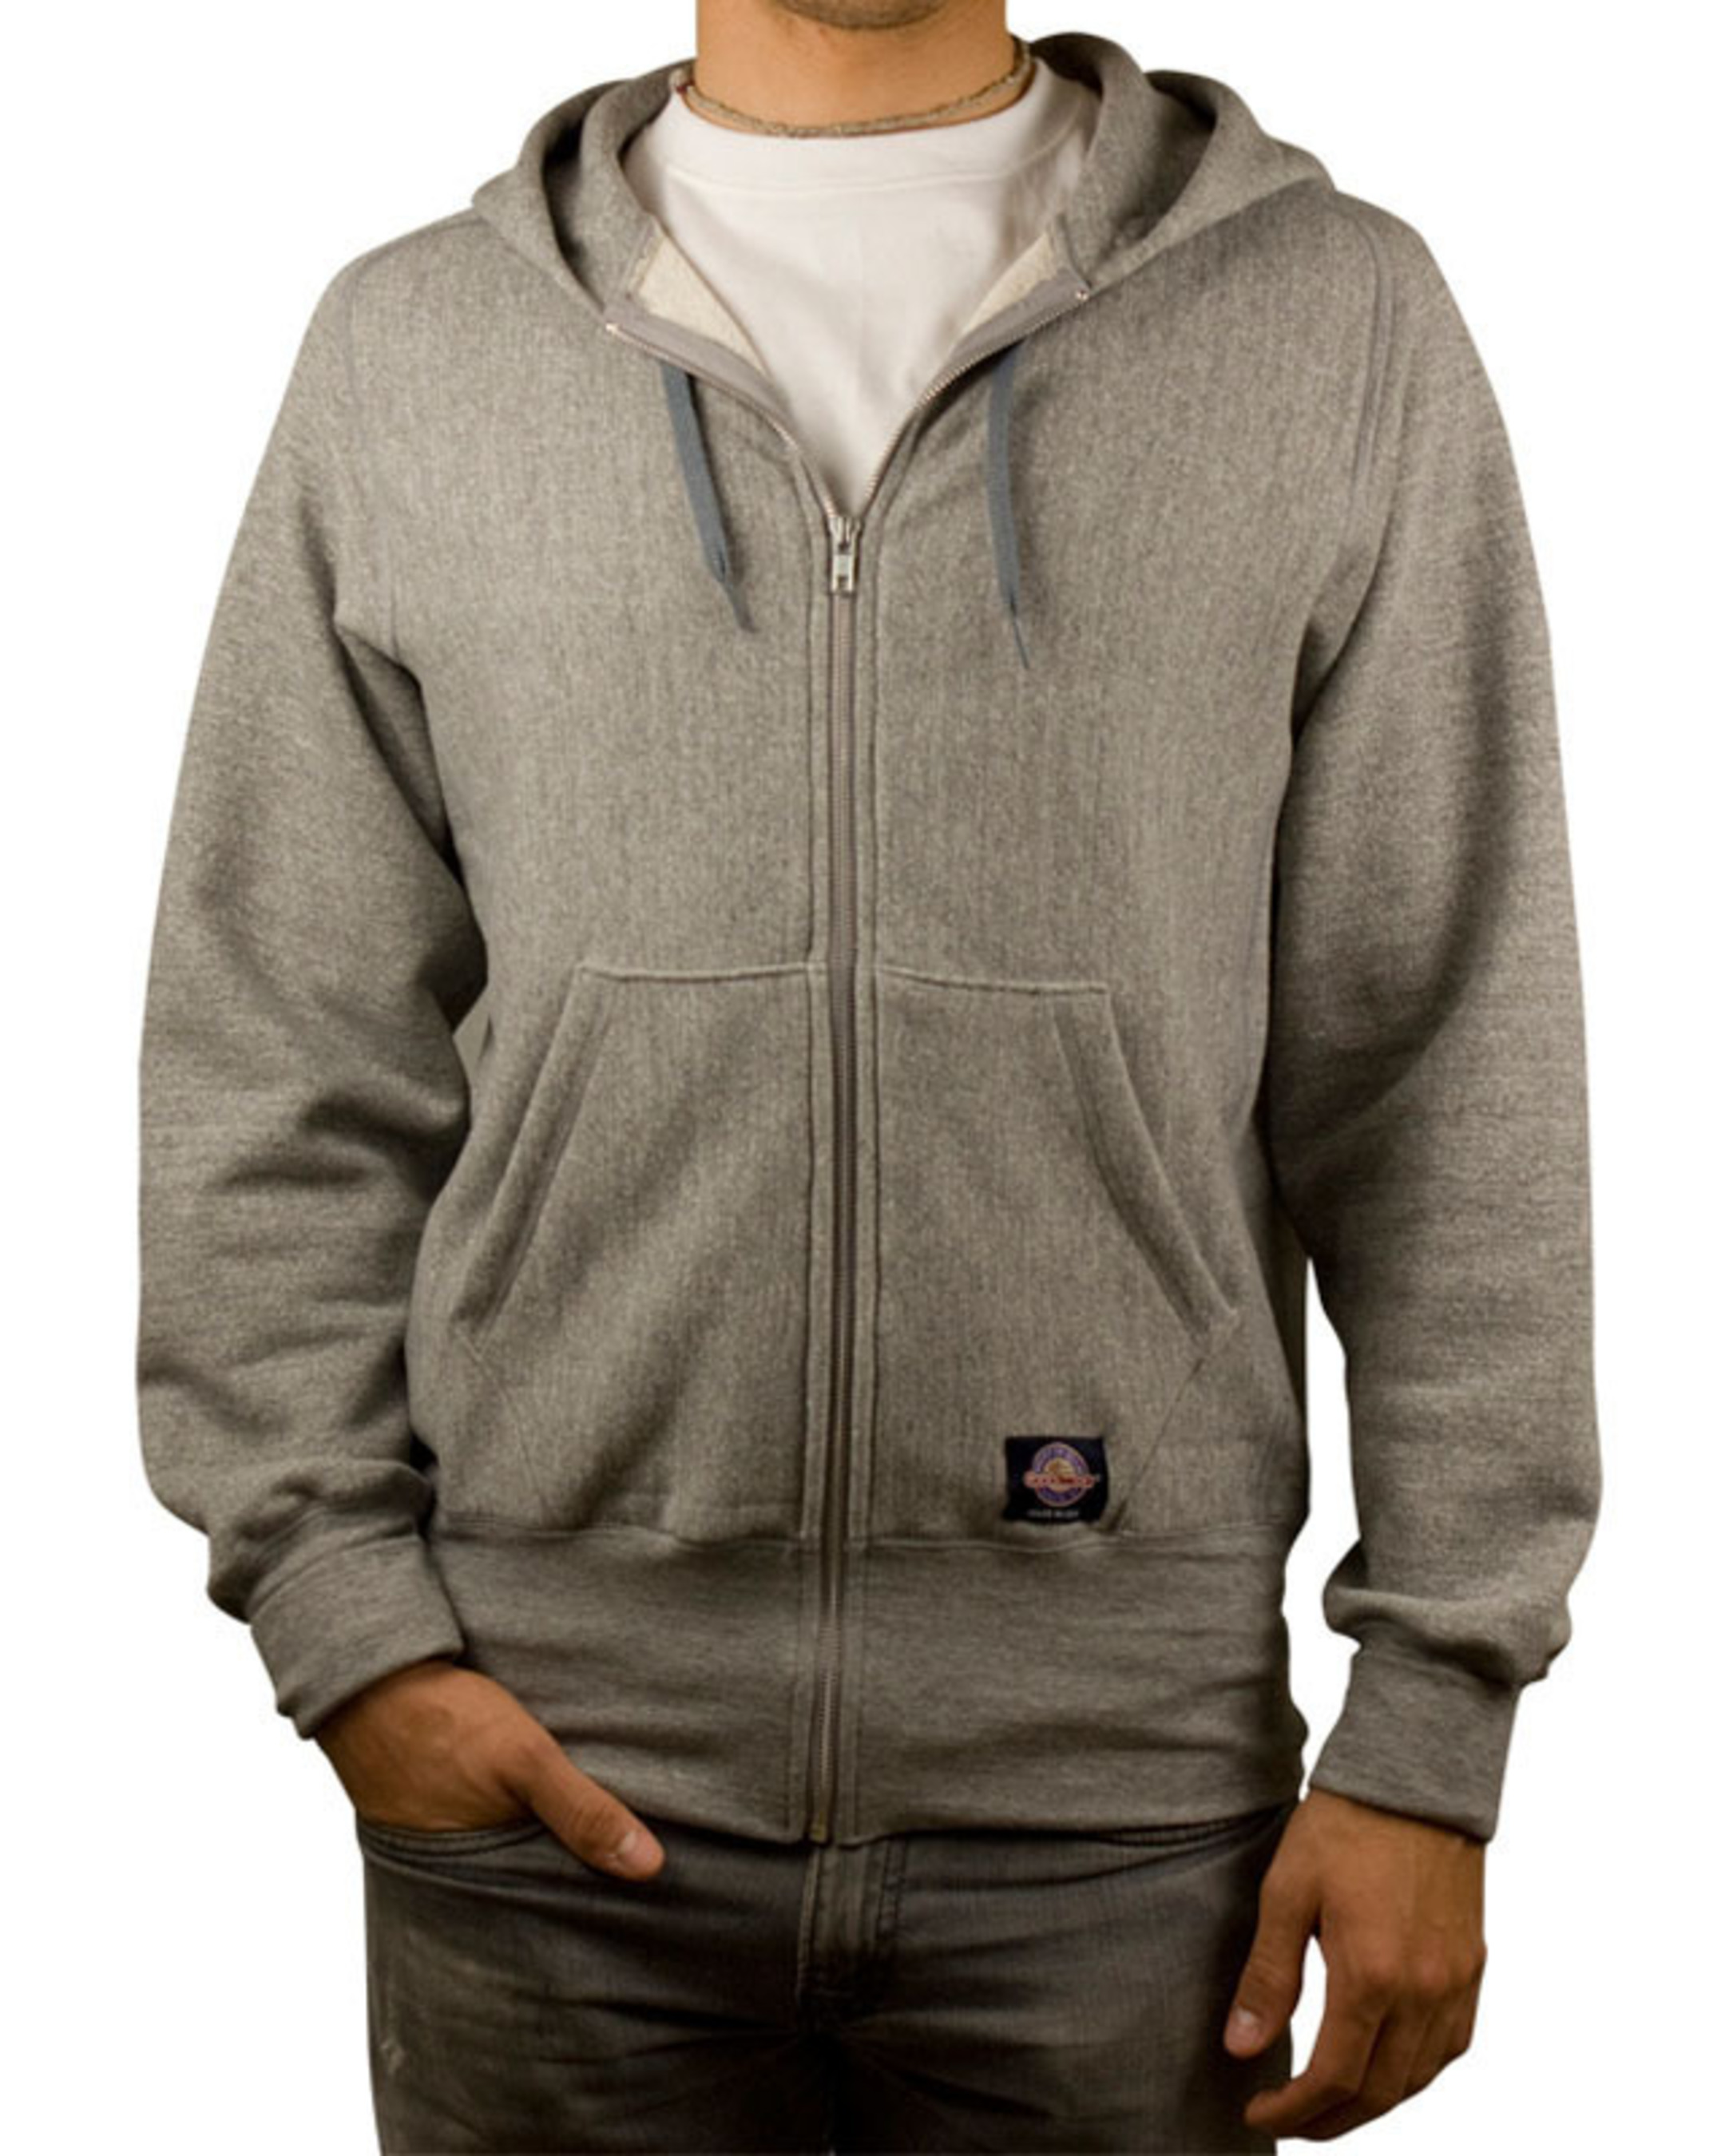 Goodwear USA Reinvents the Vintage Swing Sleeve Hoodie with Freedom ...